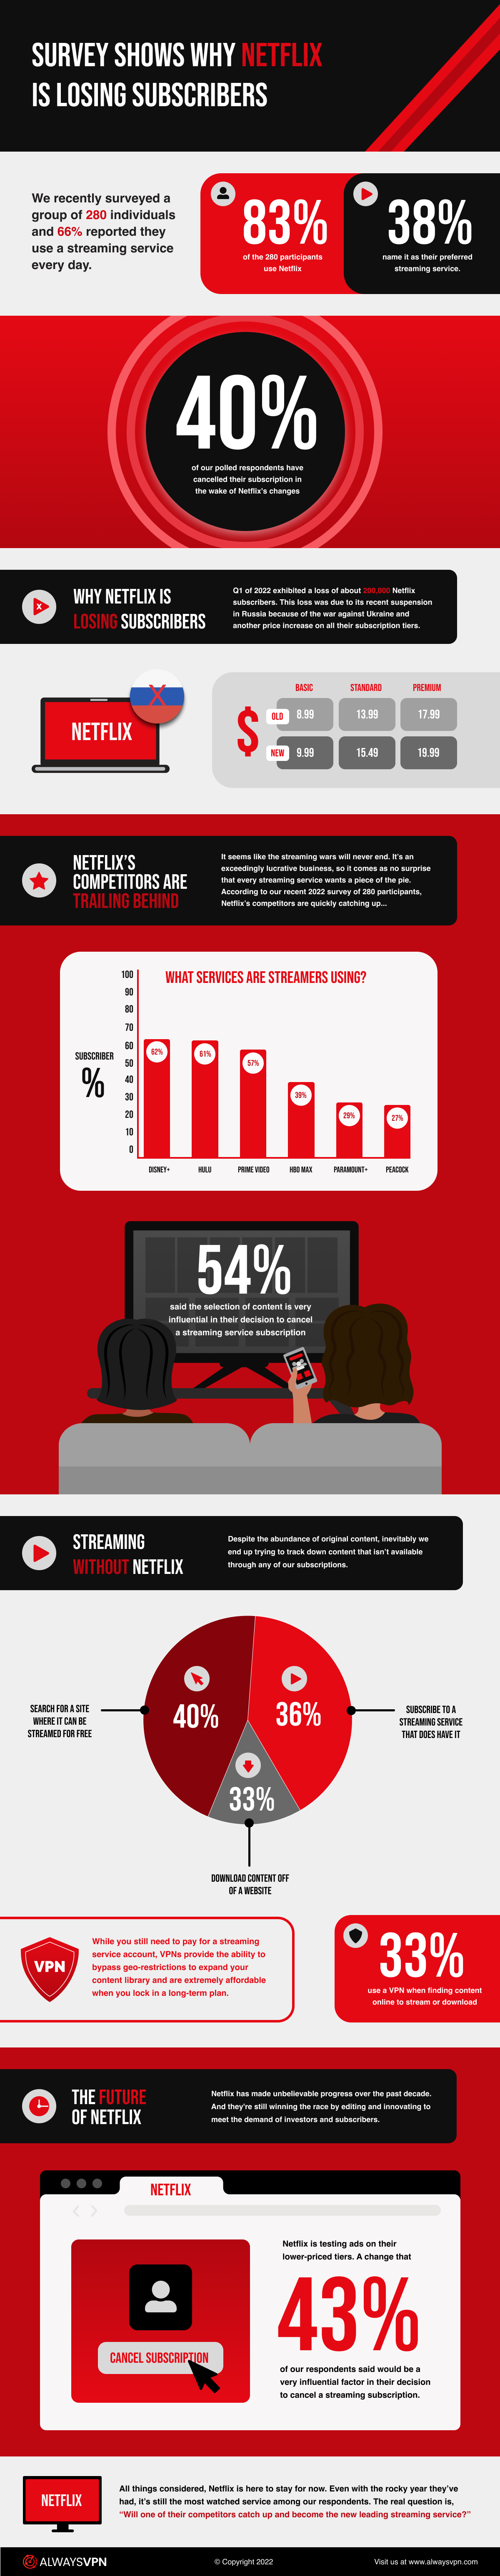 Why Netflix is Losing Subscribers Infographic